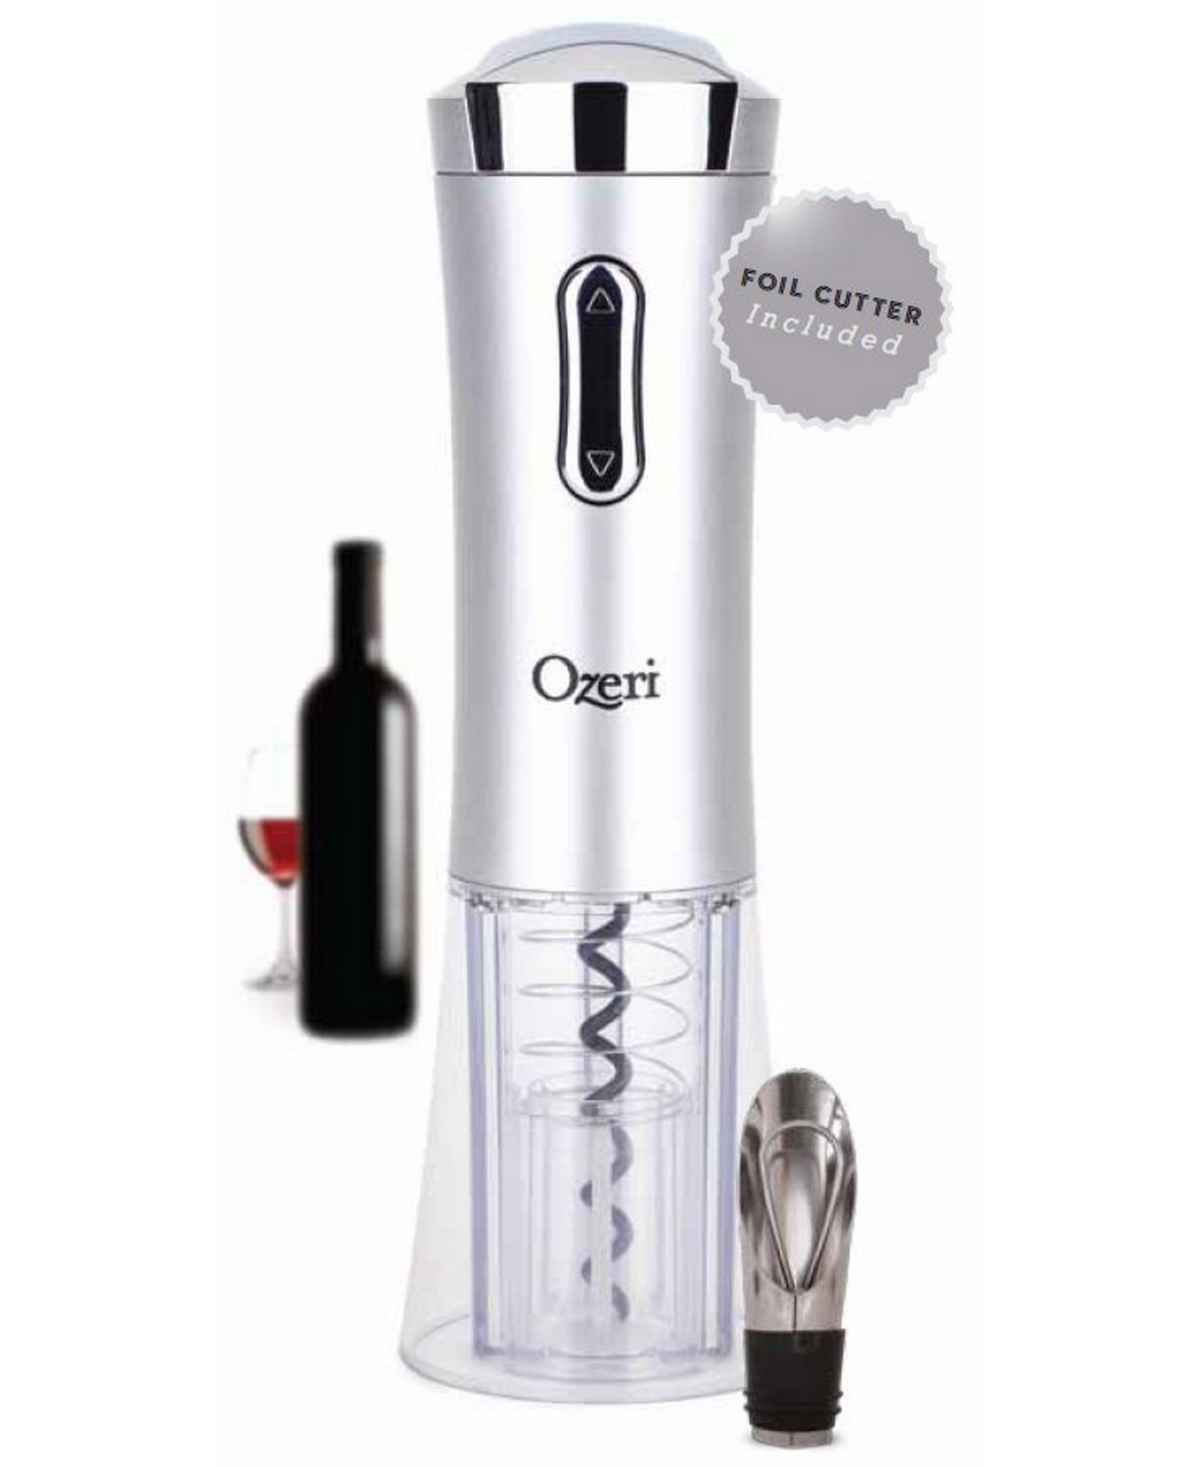 UPC 815817010018 product image for Nouveaux Ii Electric Wine Opener with Foil Cutter, Wine Pourer and Stopper | upcitemdb.com